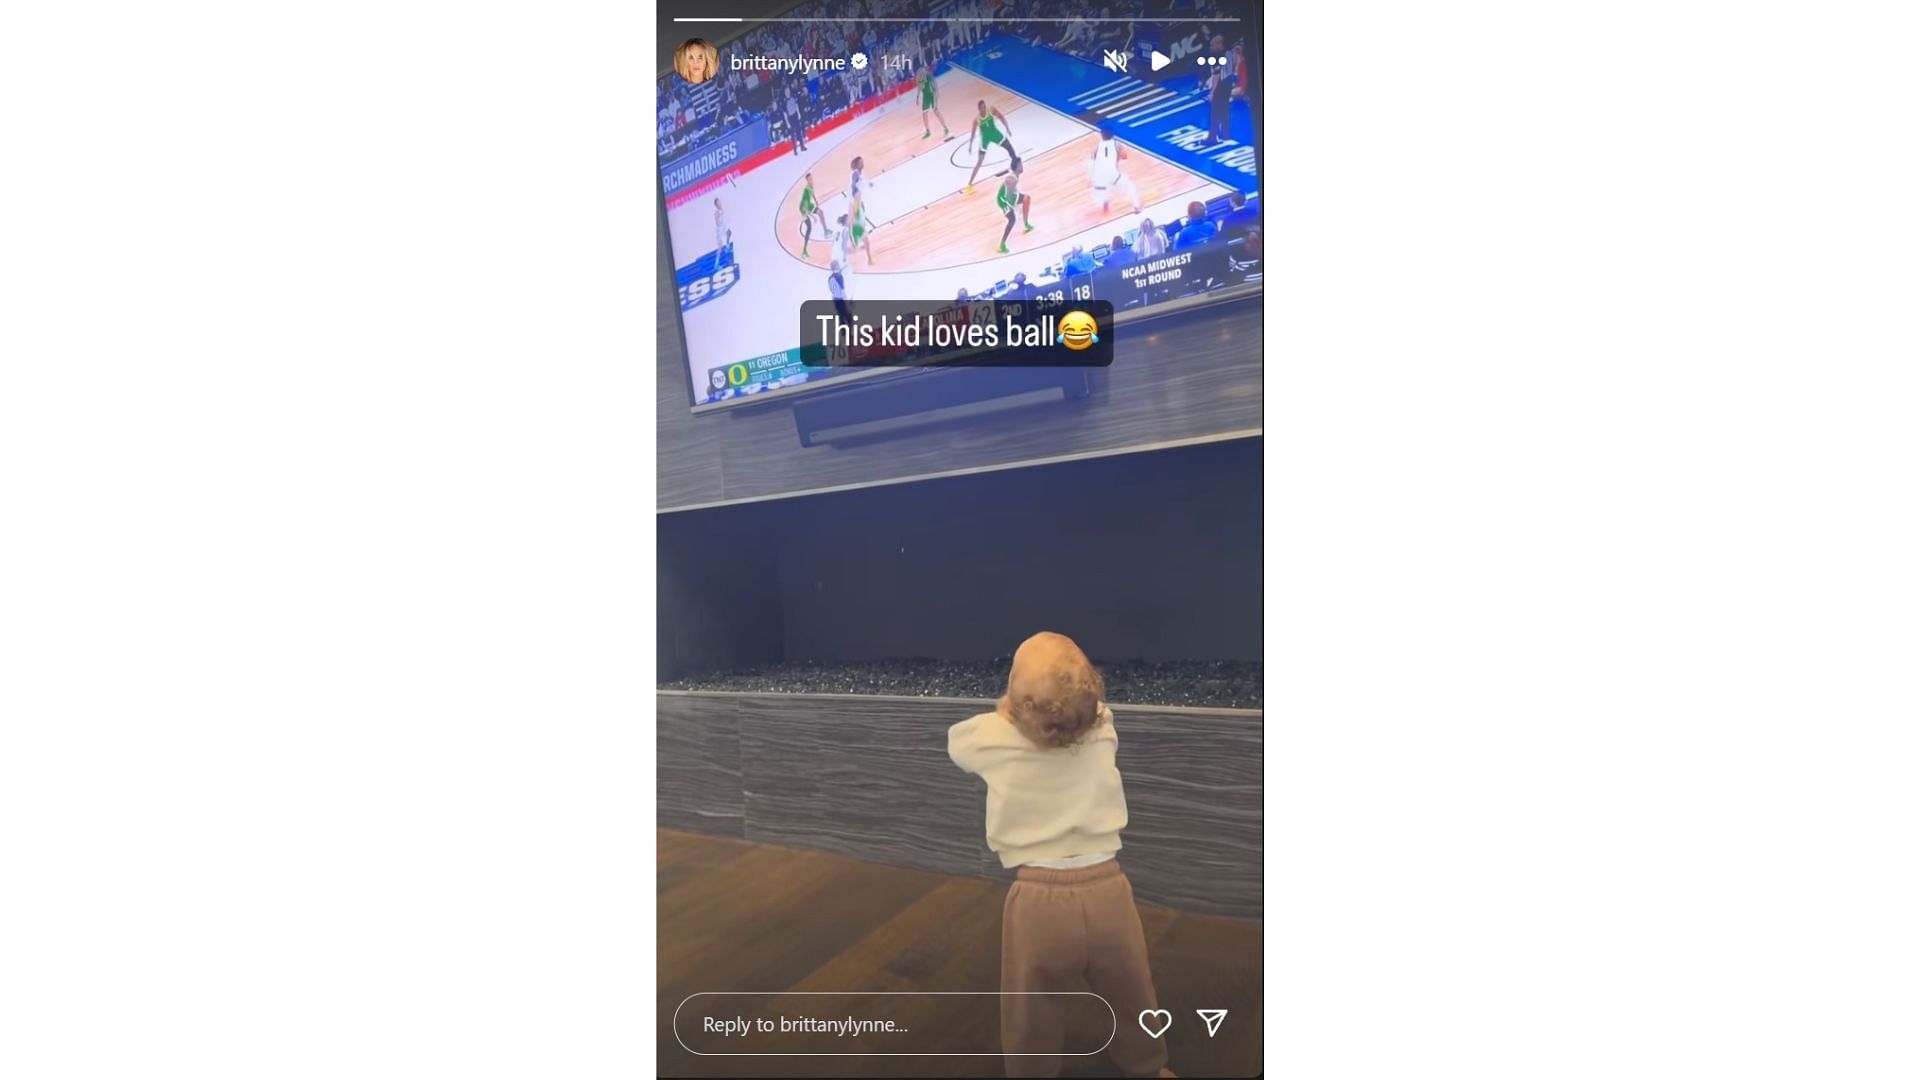 Patrick Mahomes&#039; son Bronze watches a March Madness game (Image Credit: @brittanylynne IG)